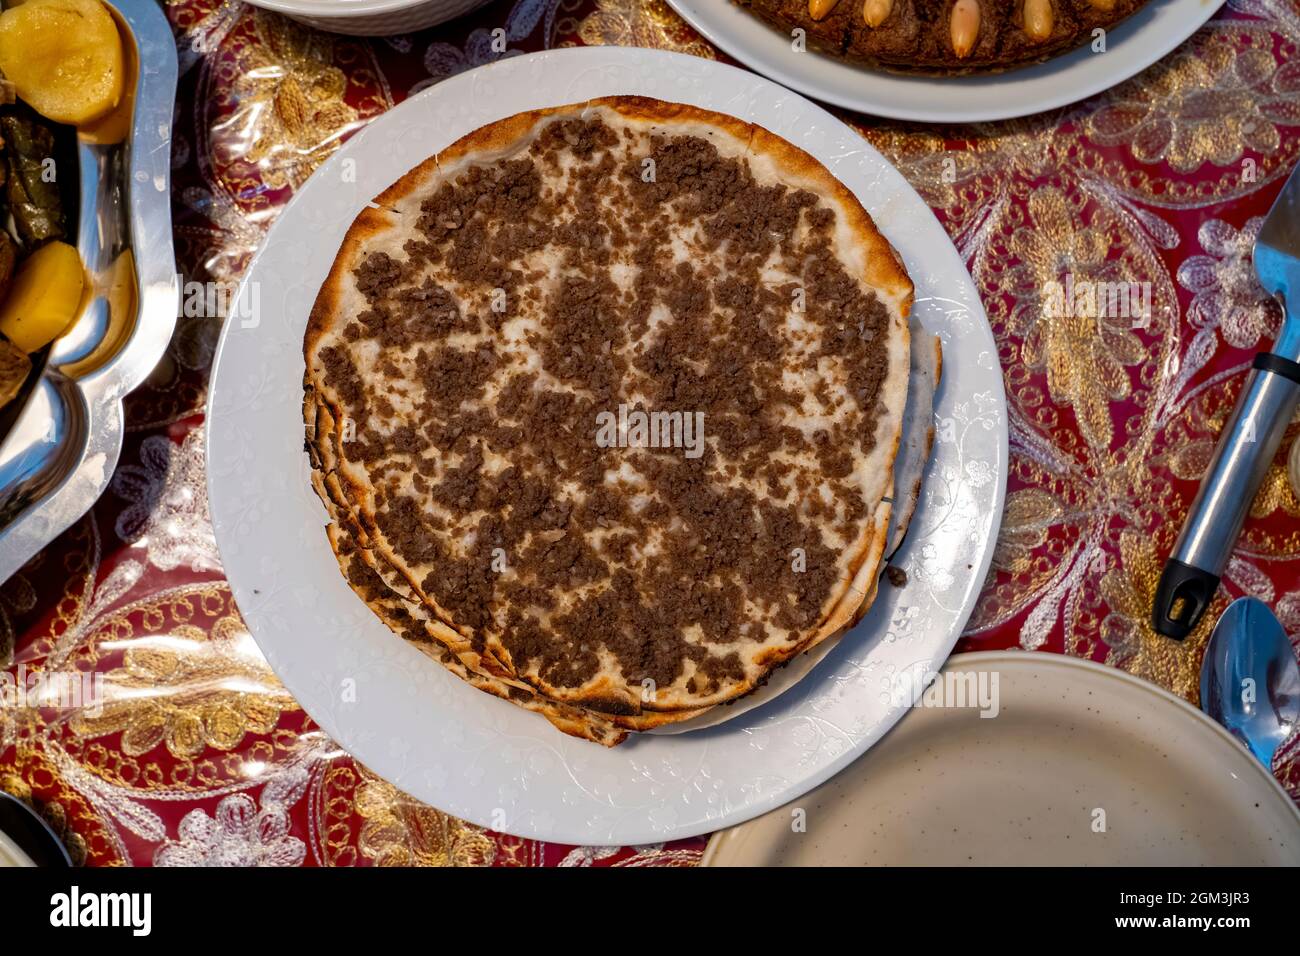 Lahmajun round, thin piece of dough topped with minced meat. Stock Photo